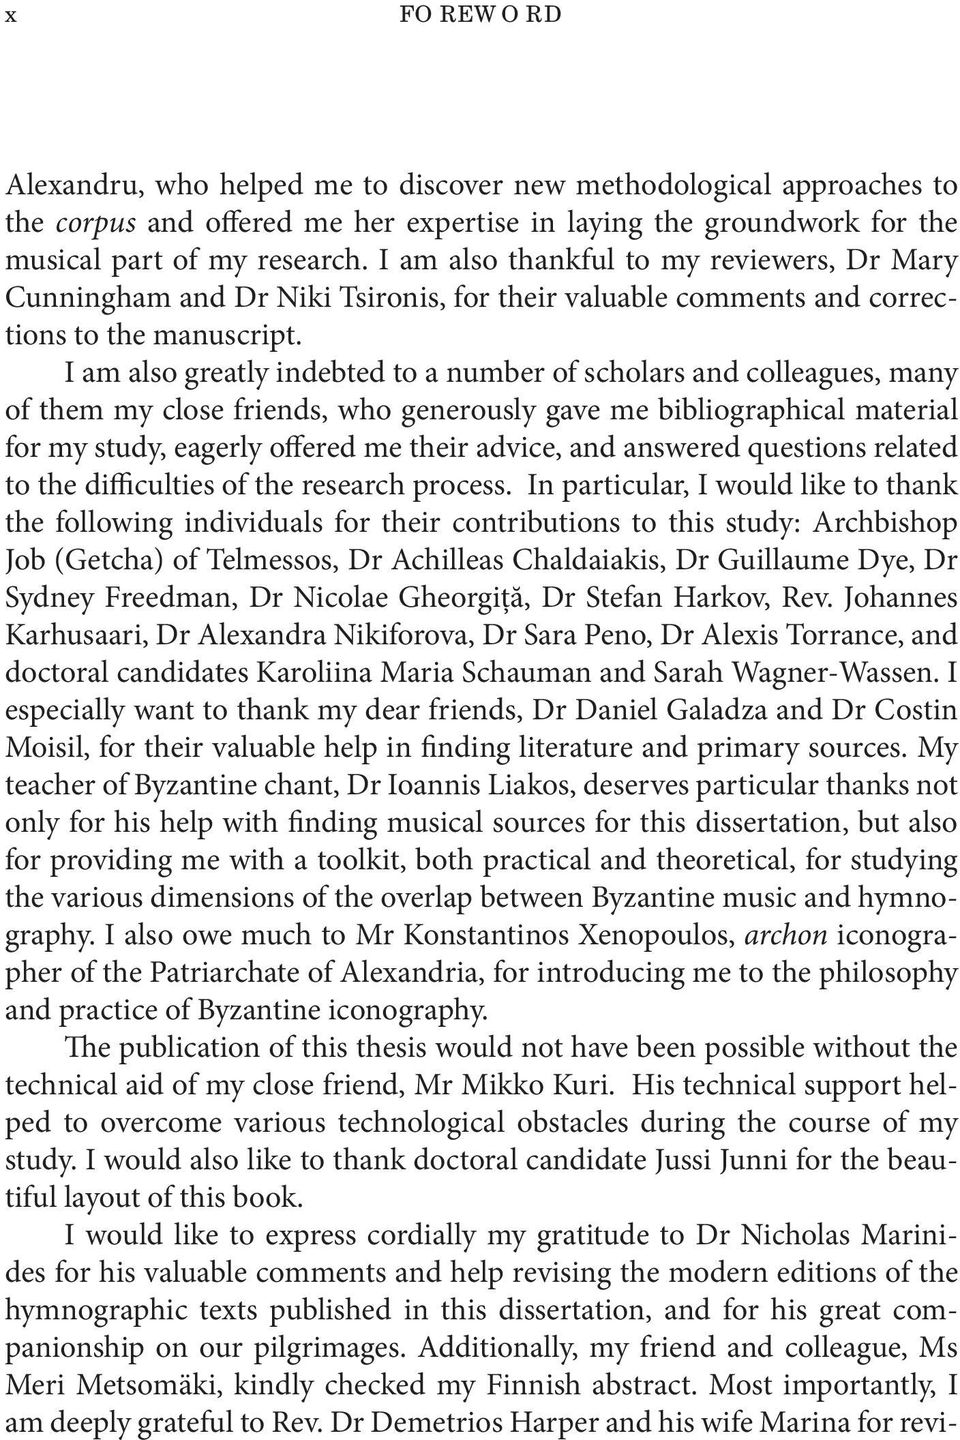 I am also greatly indebted to a number of scholars and colleagues, many of them my close friends, who generously gave me bibliographical material for my study, eagerly offered me their advice, and